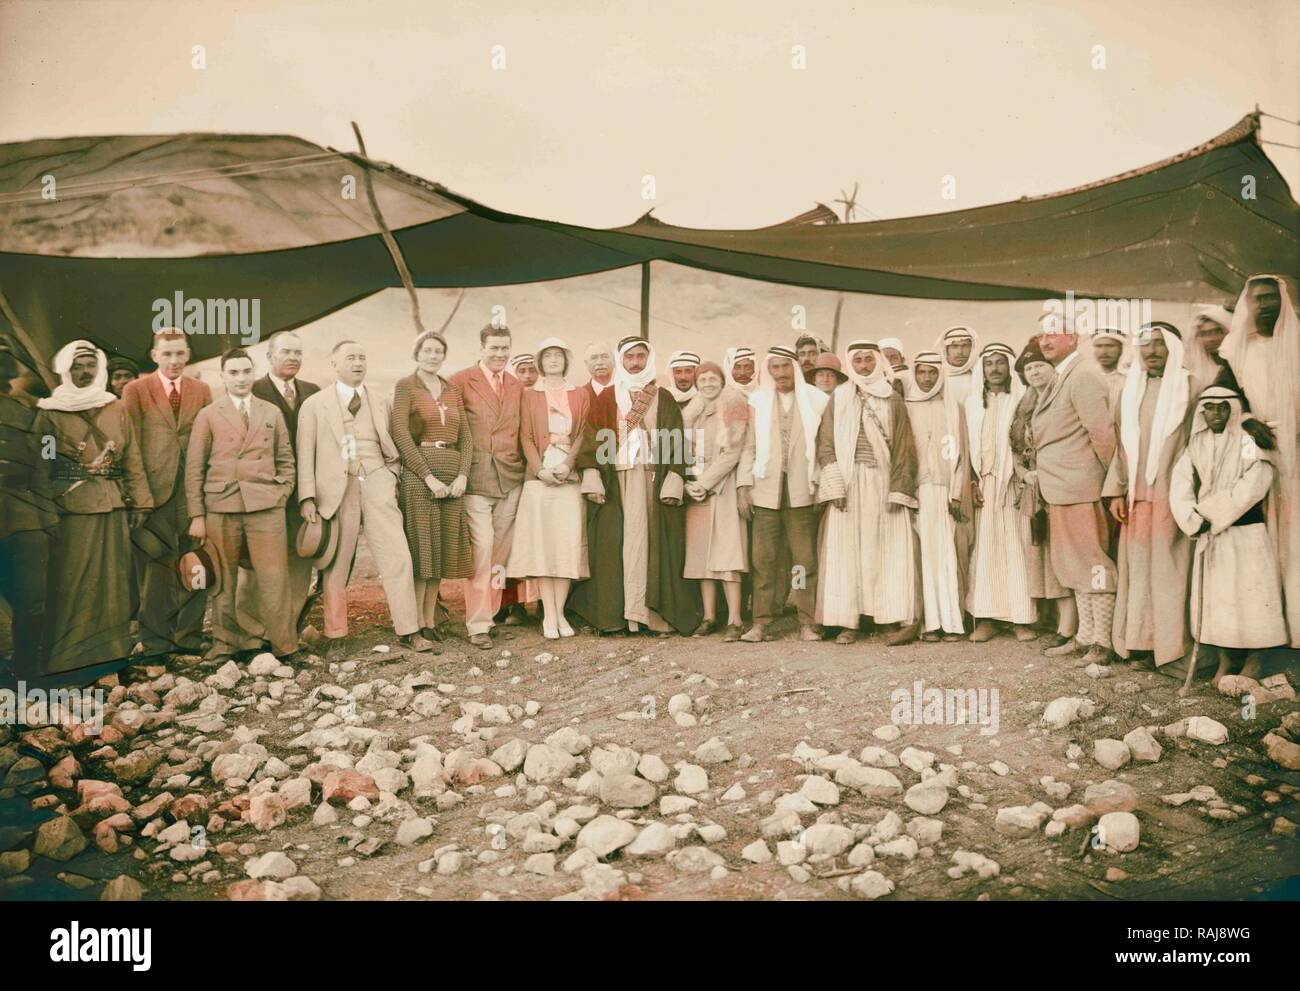 Mr. & Mrs. Tunney at Bedouin camp with Sheik Majid at Shumet Kimrin. Mr. & Mrs. La Gorce, March 1931. Whole group reimagined Stock Photo